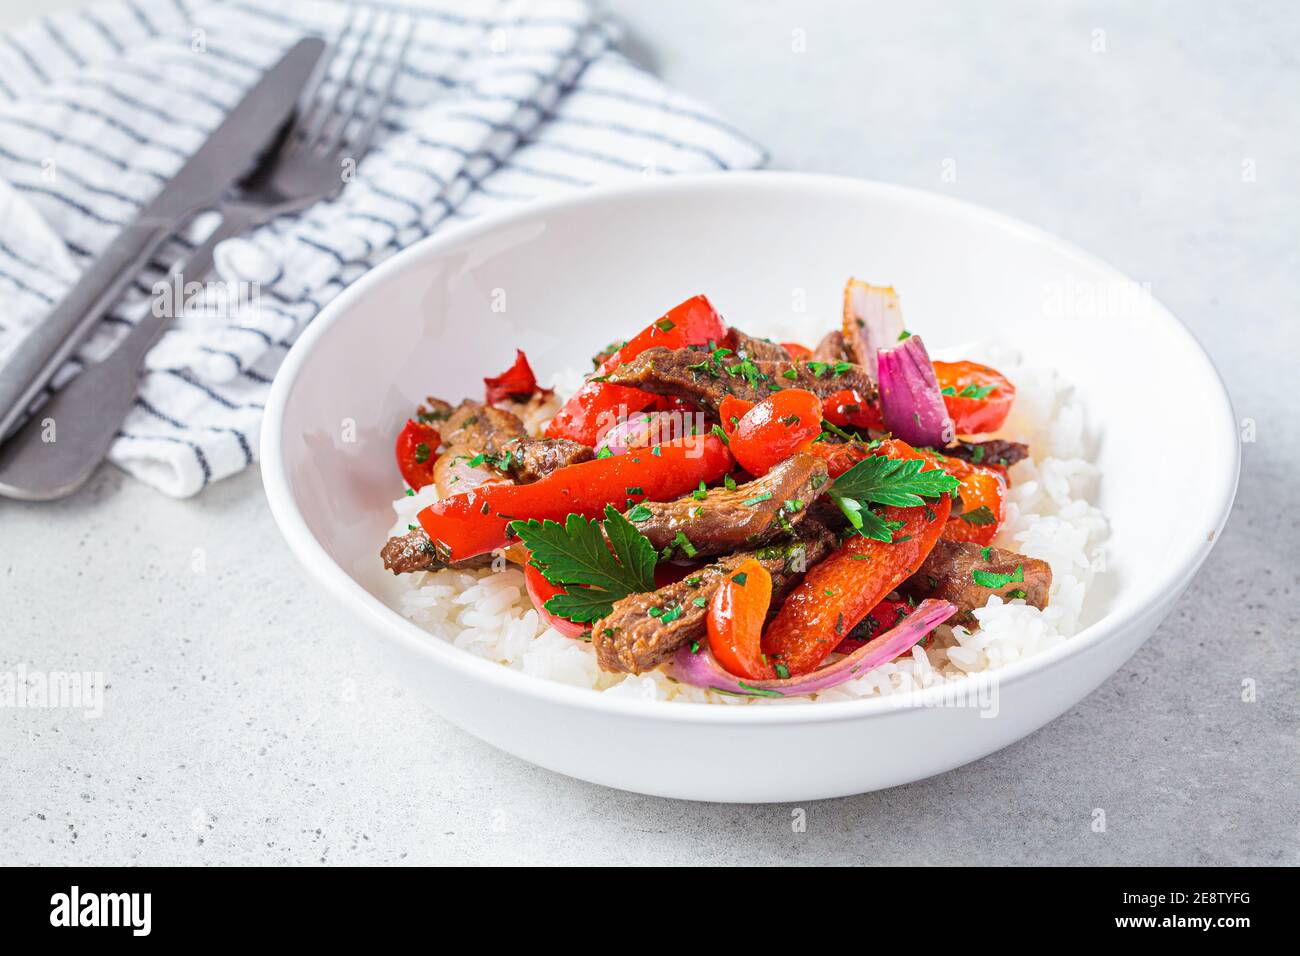 Fried pieces of beef with vegetables and rice in a white plate. Stir fry beef with peppers and onions, served with rice. Stock Photo